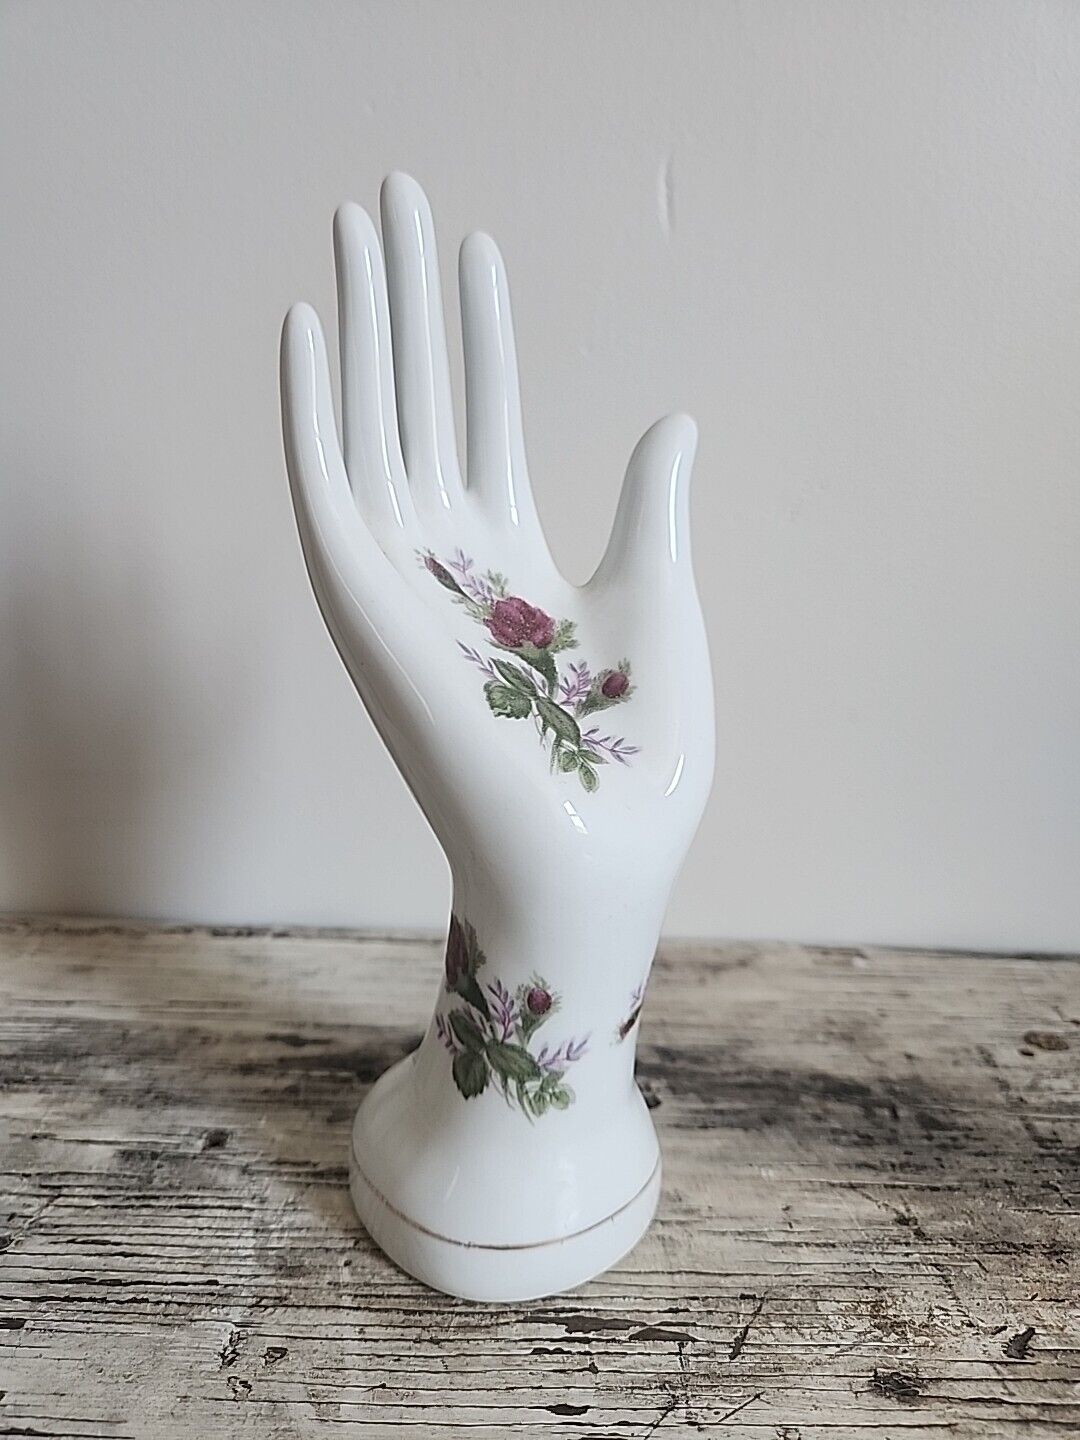 Vintage Porcelain Lady's Hand Figurine with Hand Painted Floral Designs